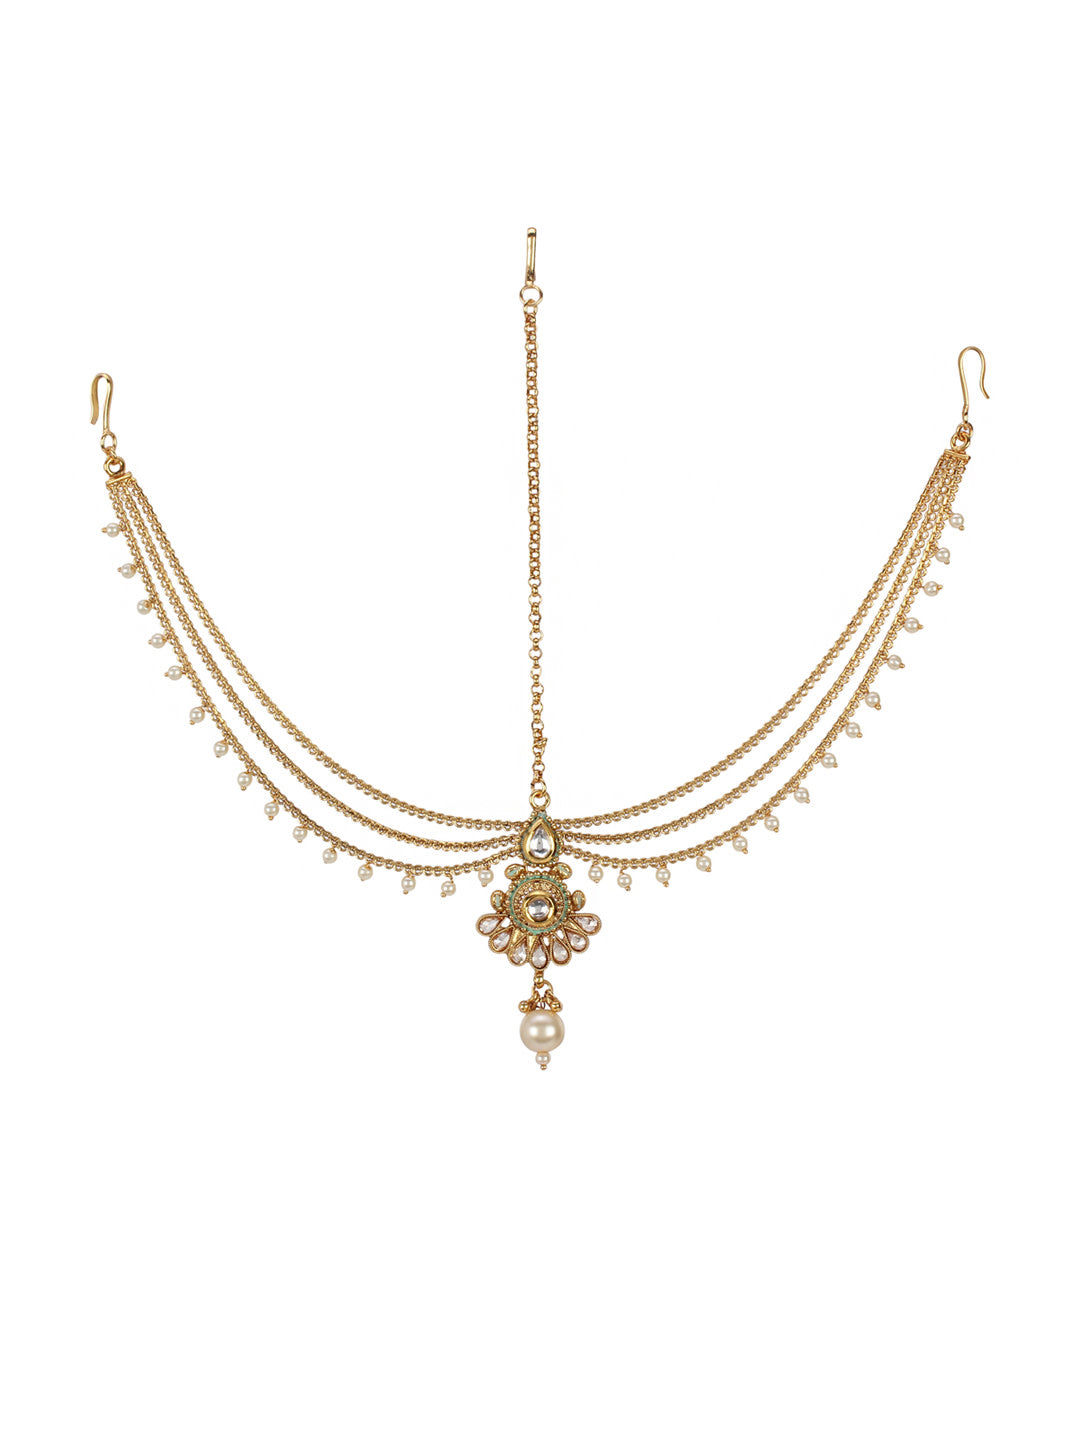 Designer Gold Plated Maathapatti With Gold Bead Chain For Women And Girls